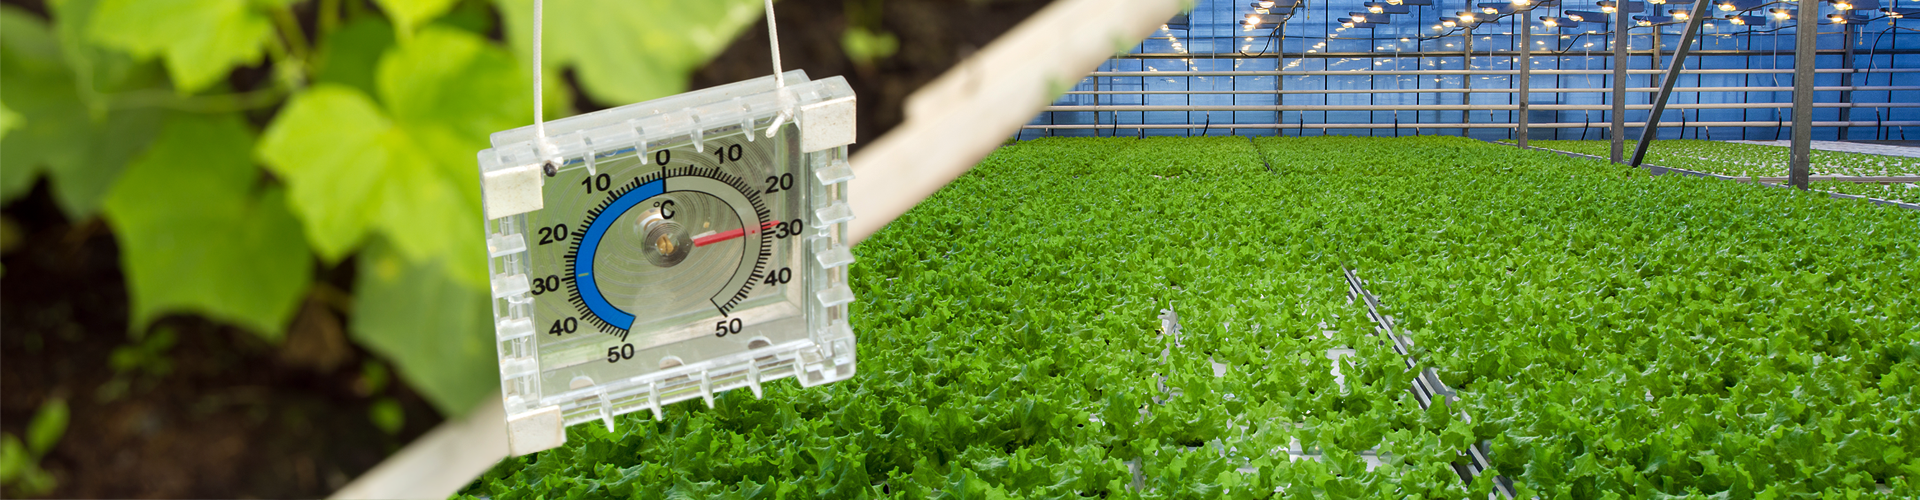 Temperature control is important in greenhouses